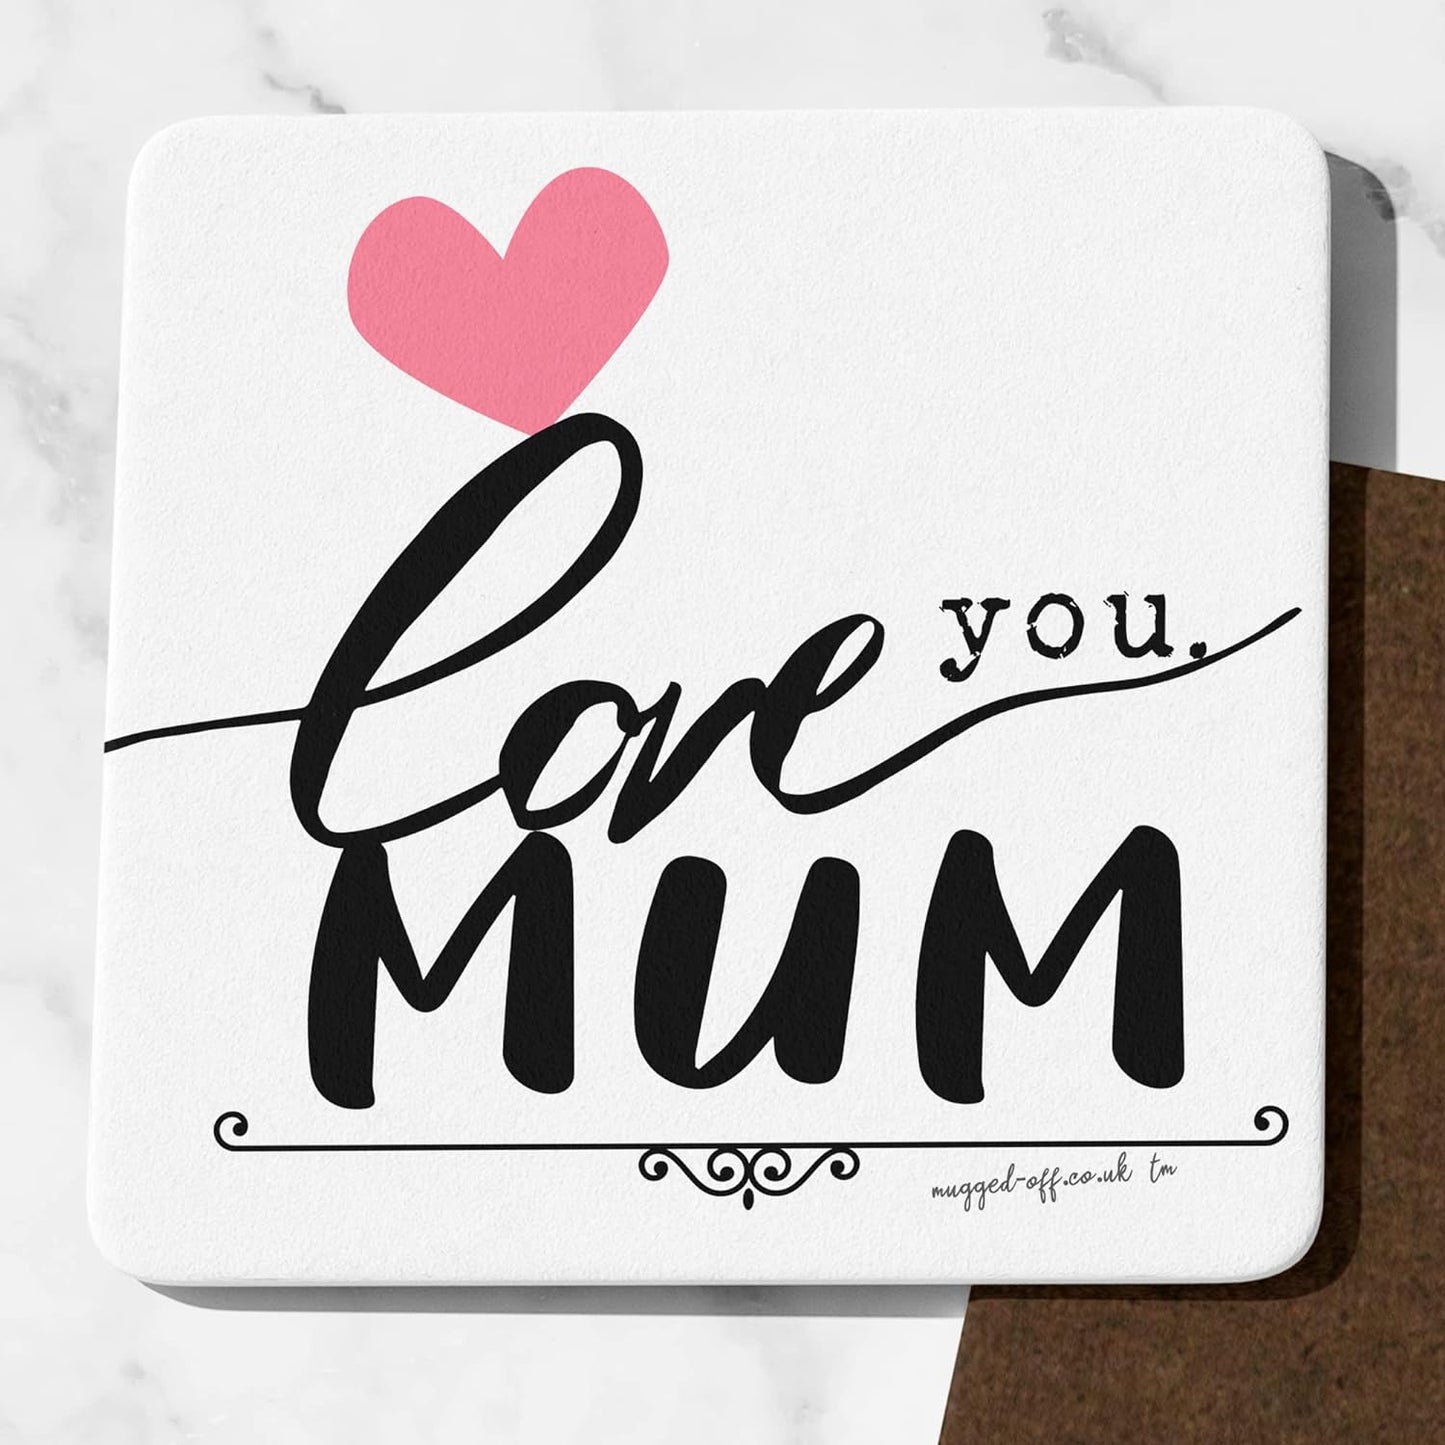 Mum Birthday Present From Son Daughter Funny Best Mother Gift Love you Mum Coaster Coaster Lovely Mum